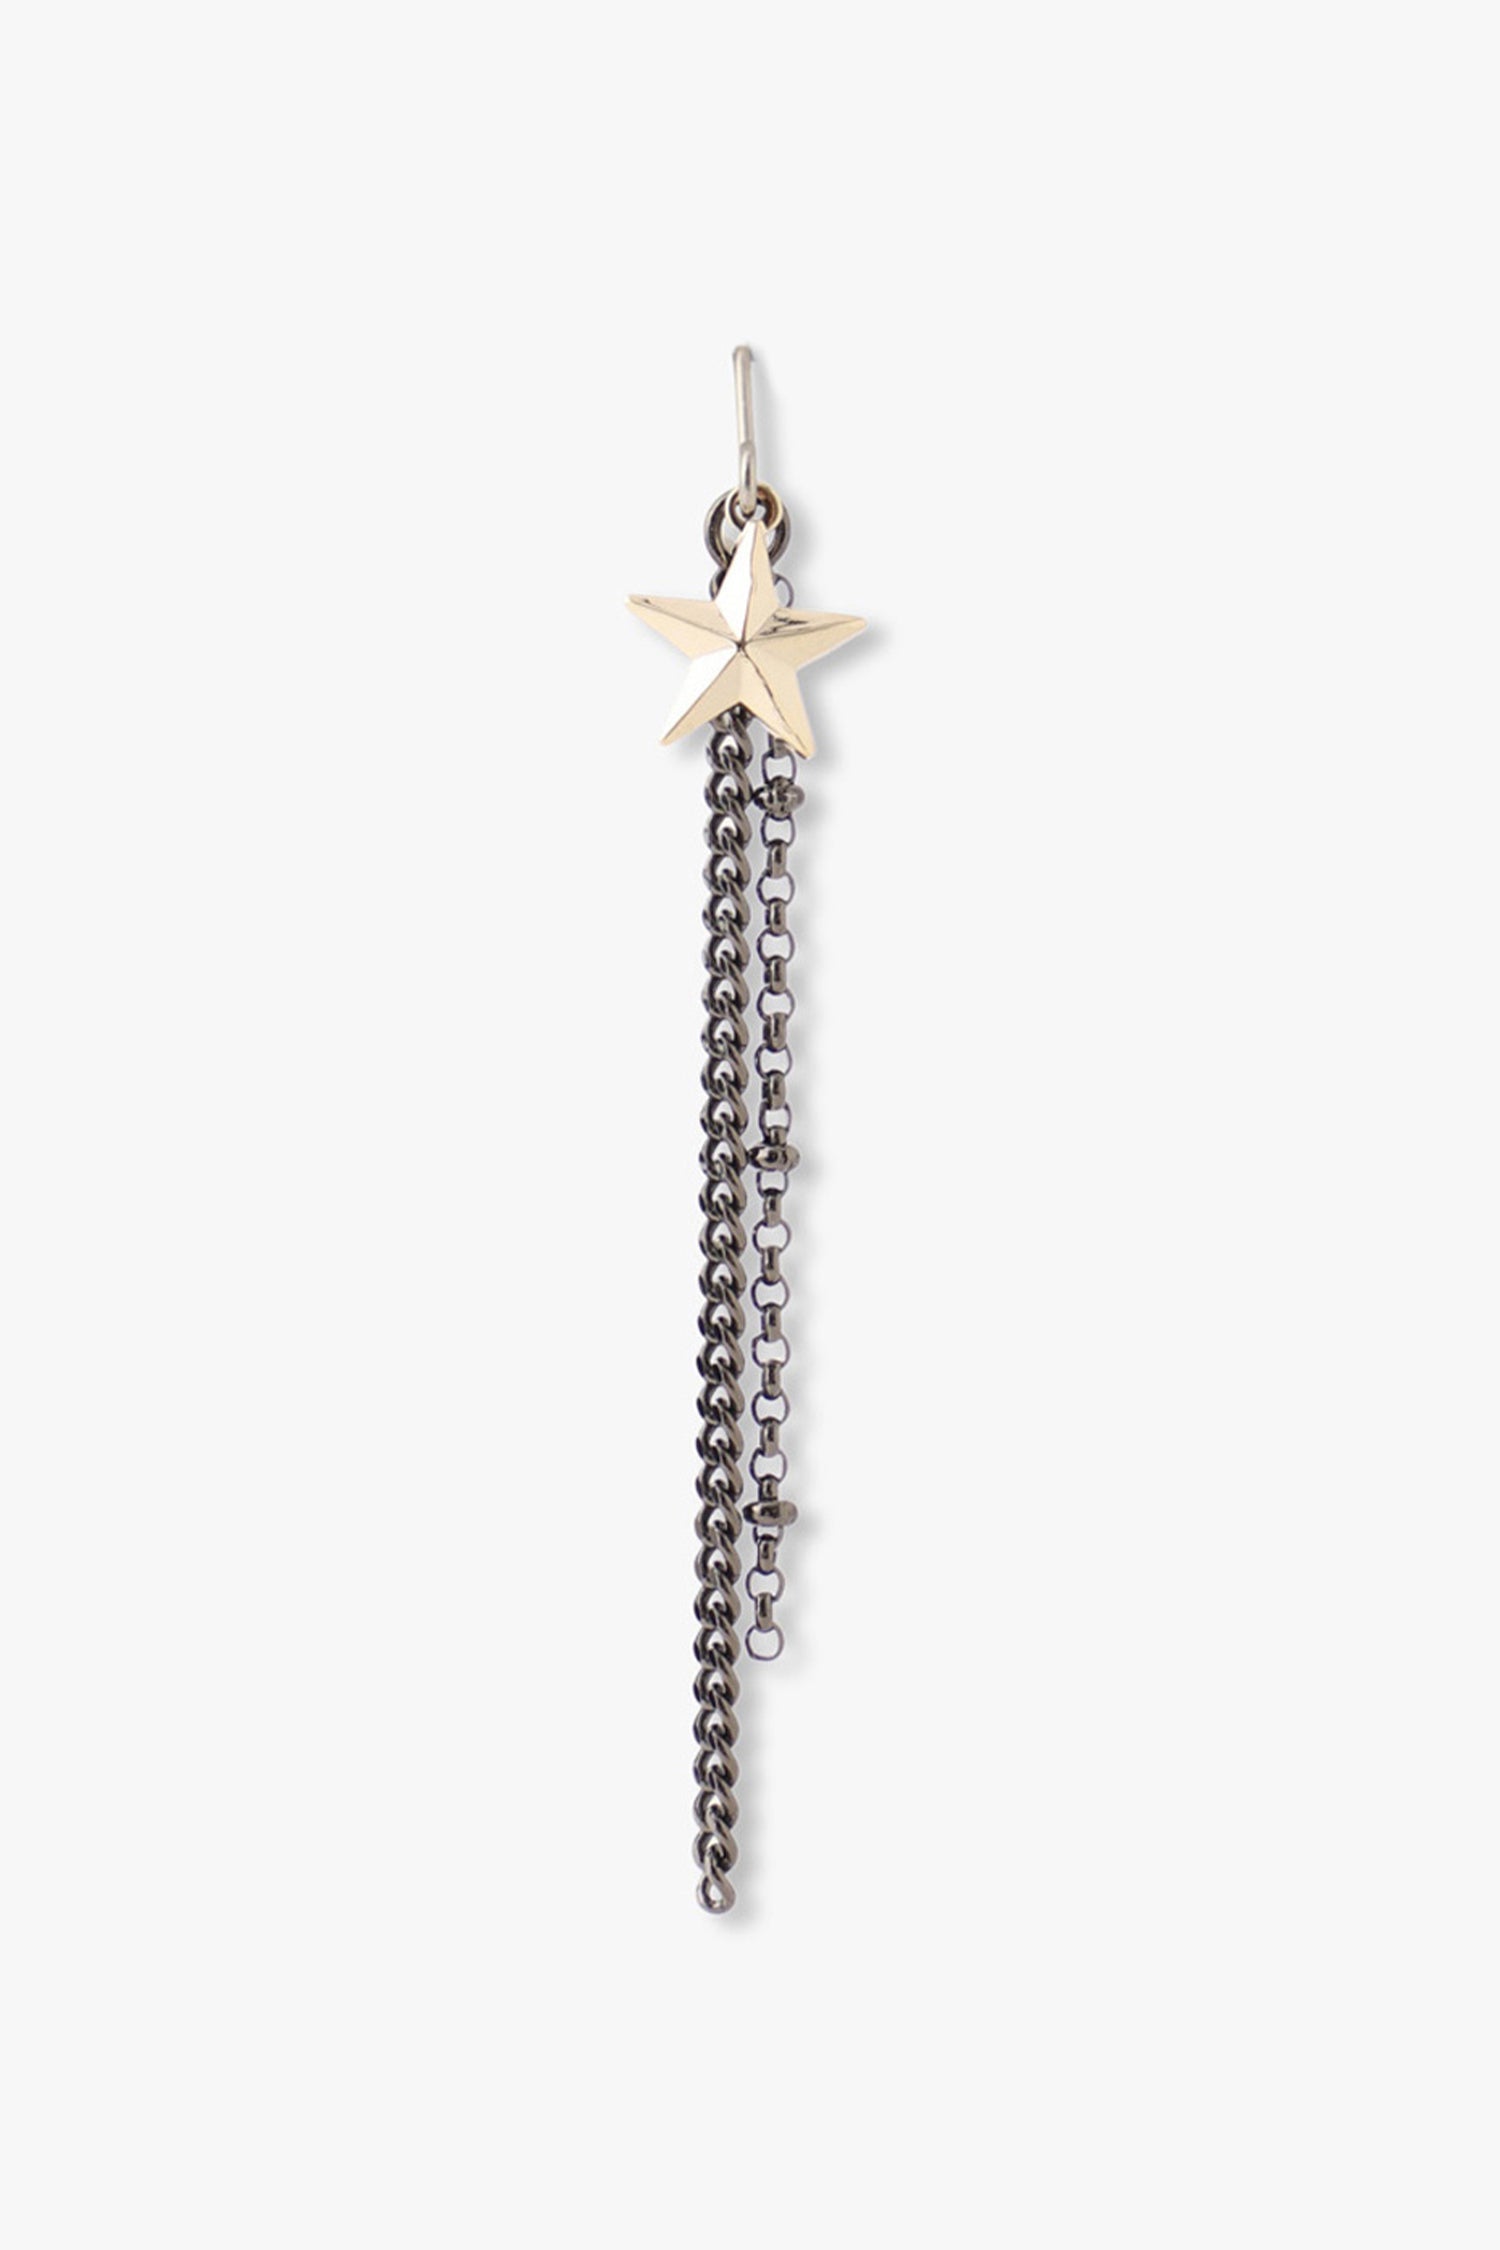 Panda Drop Chain Earrings, Gunmetal 2-chained one longer than other, with a golden star 